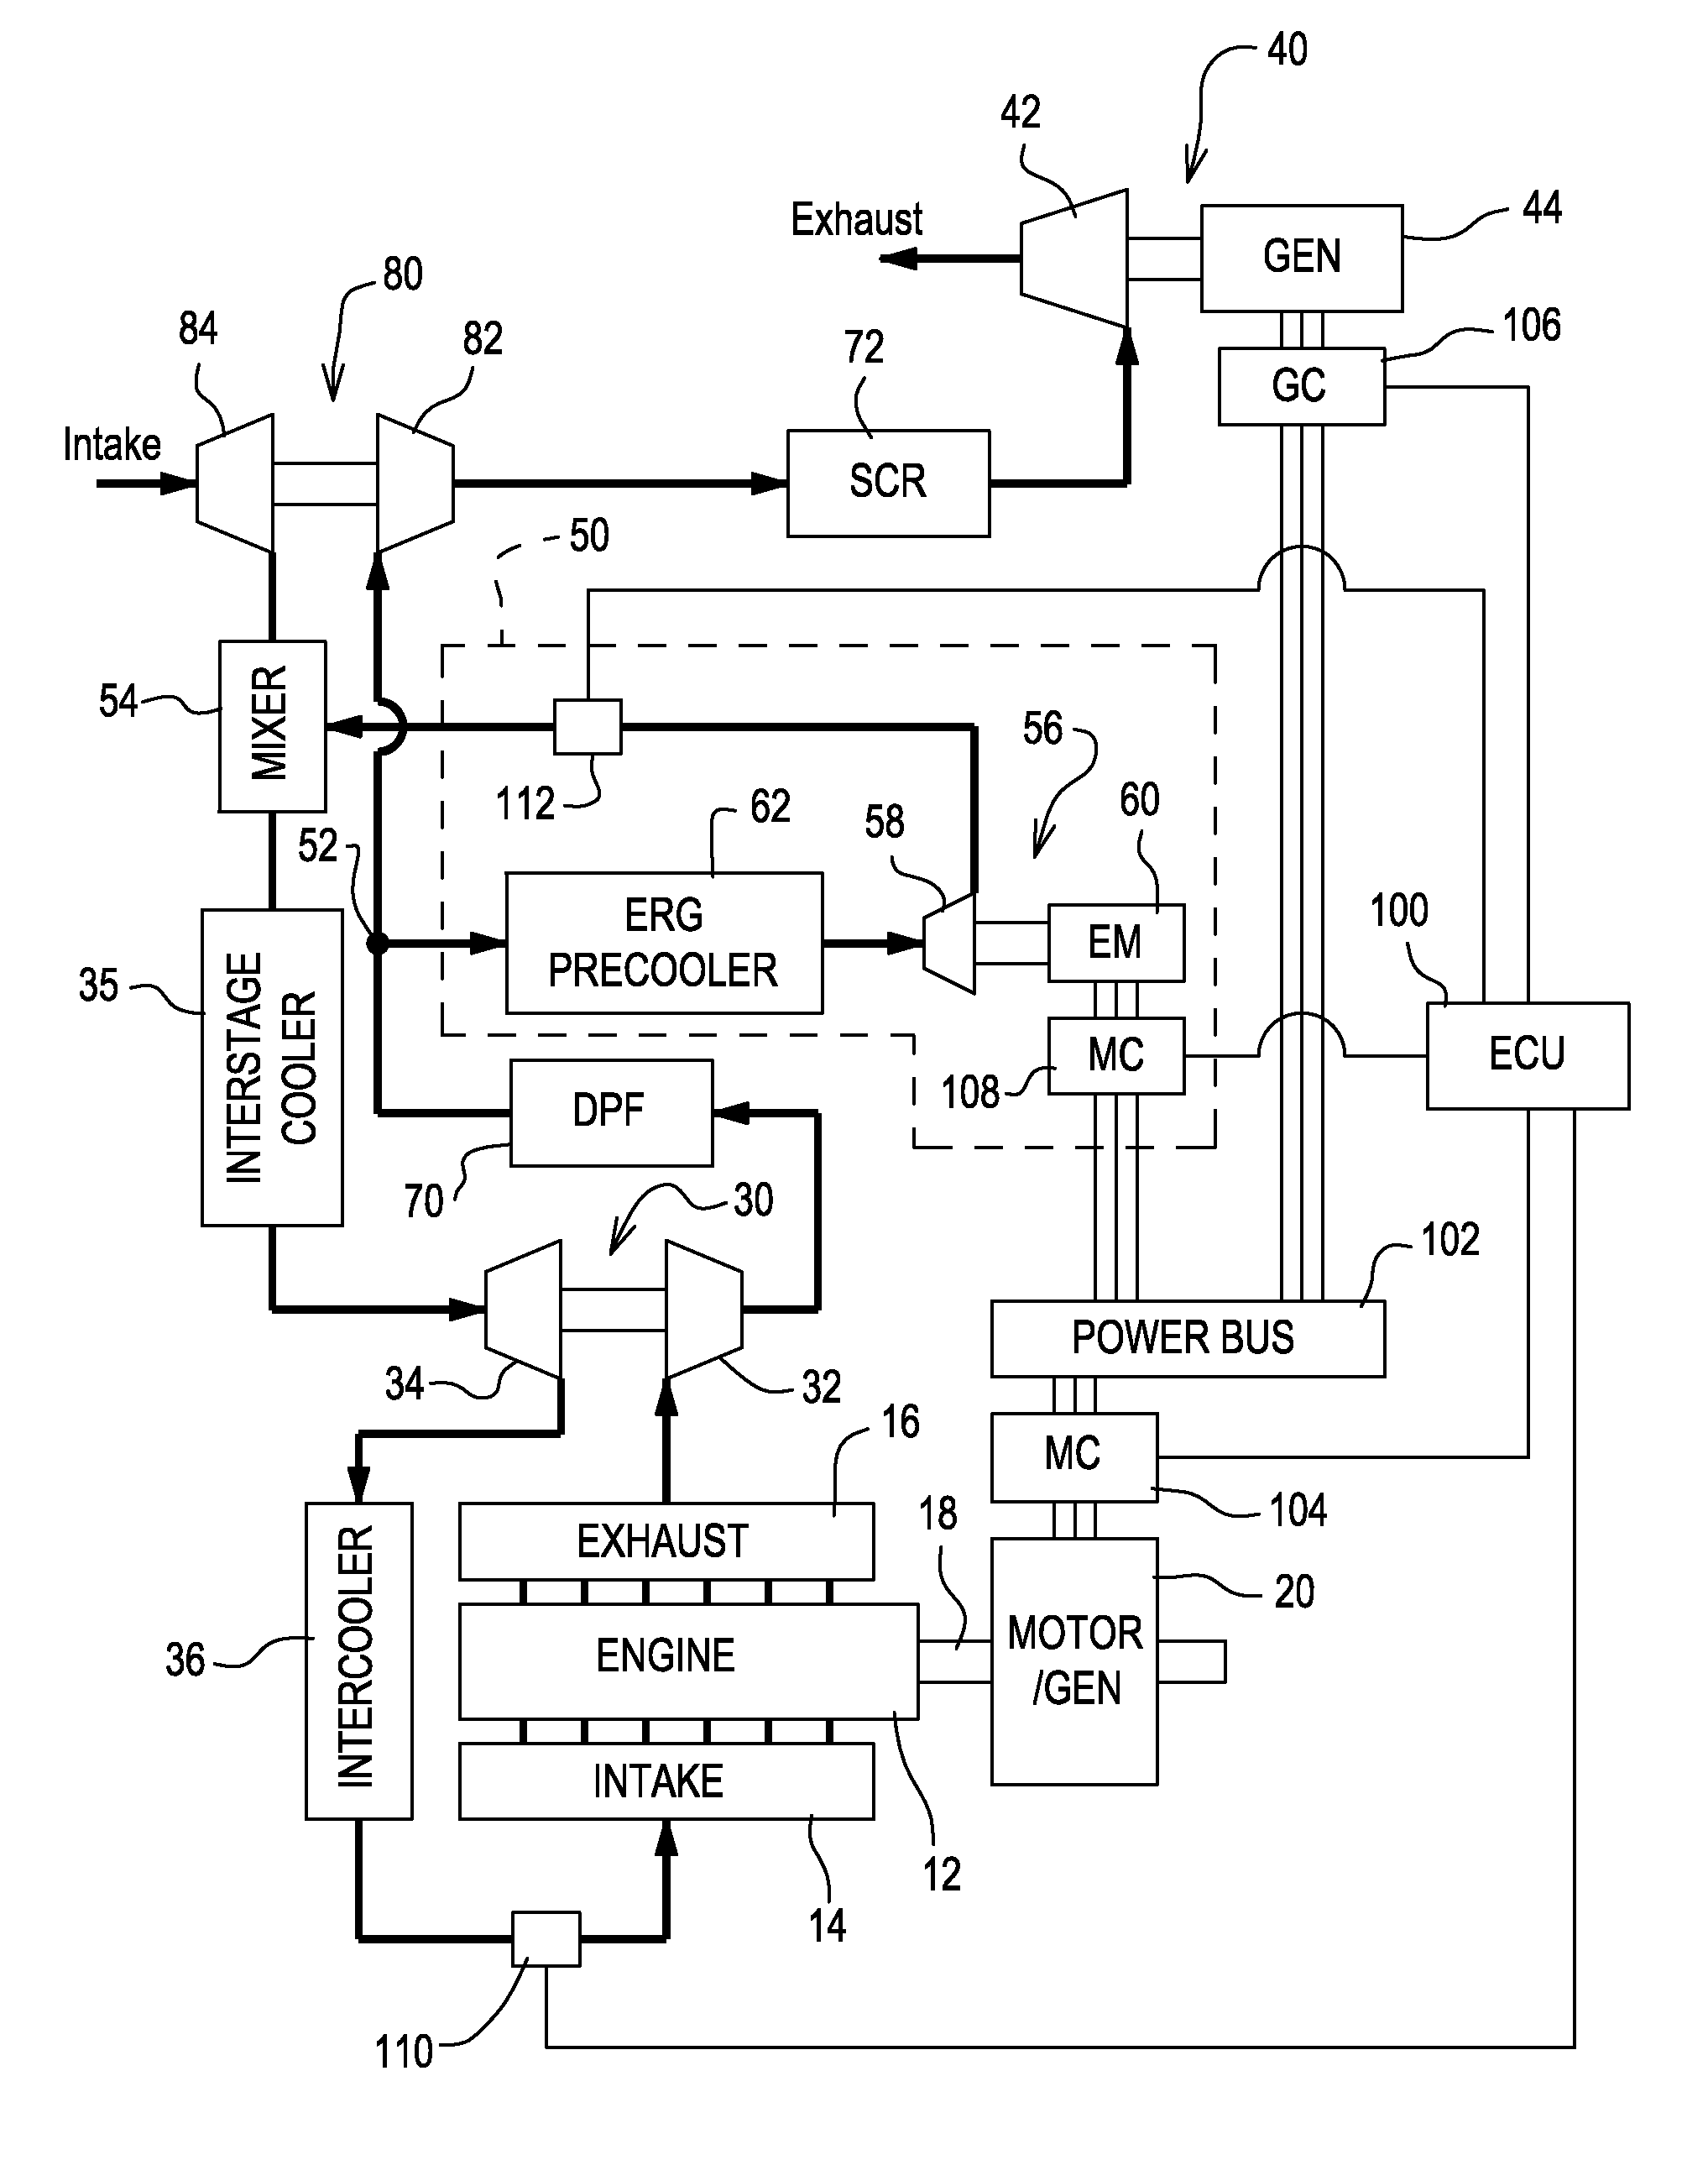 Interstage exhaust gas recirculation system for a dual turbocharged engine having a turbogenerator system